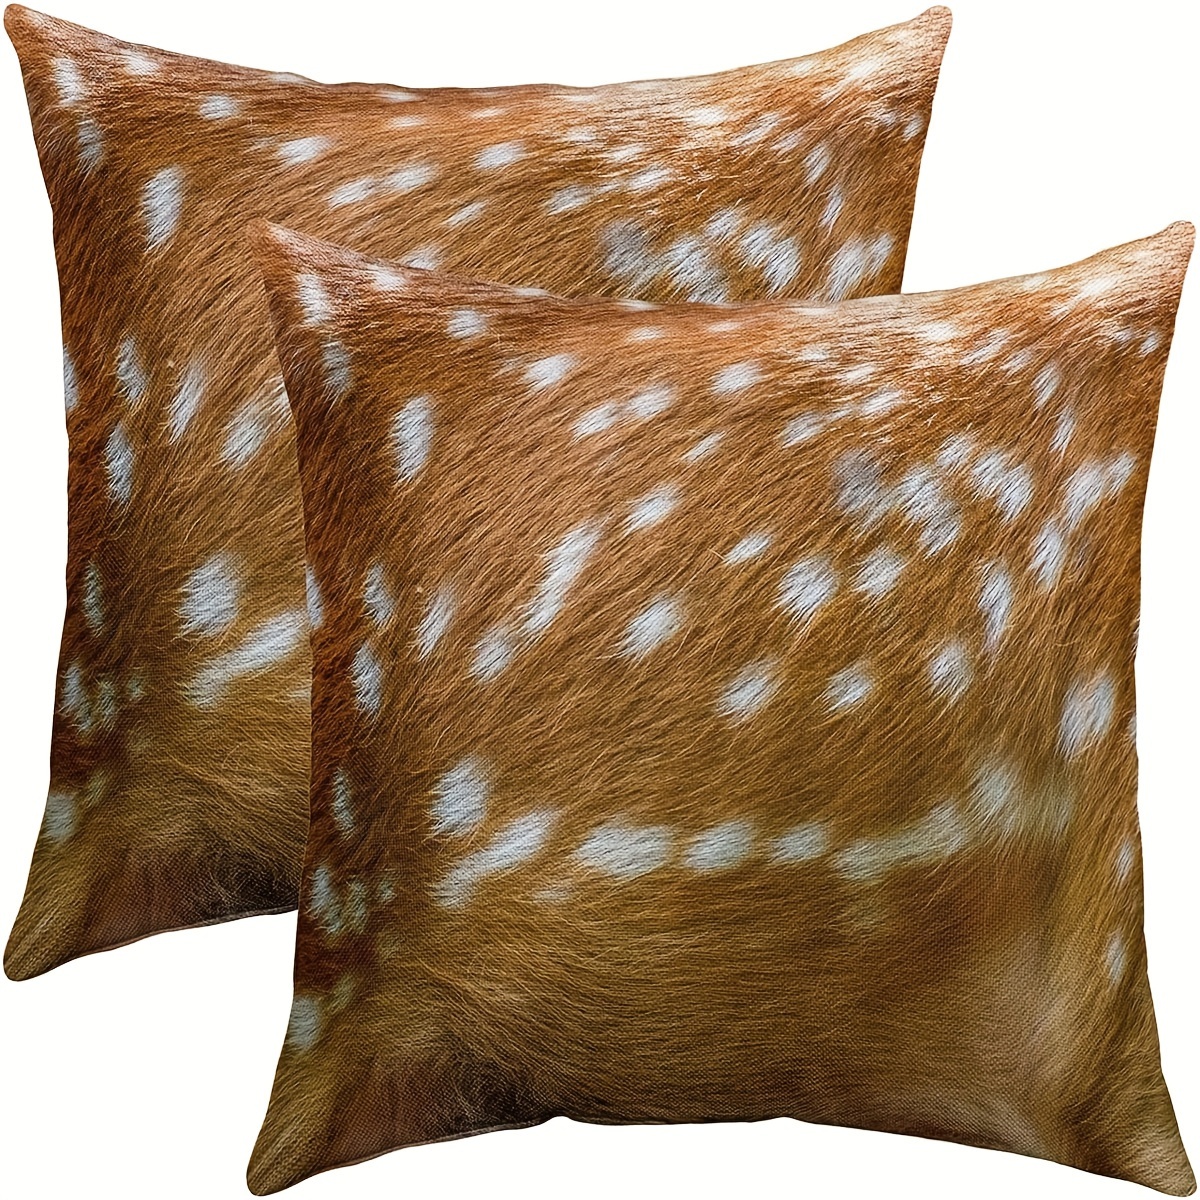 

Vintage Style Deer Pattern Throw Pillow Covers 18x18 Inch - Set Of 2 Soft Short Plush Zippered Cushion Cases For Home And Office Decor, 100% Polyester, Hand Washable - Fits Various Room Types